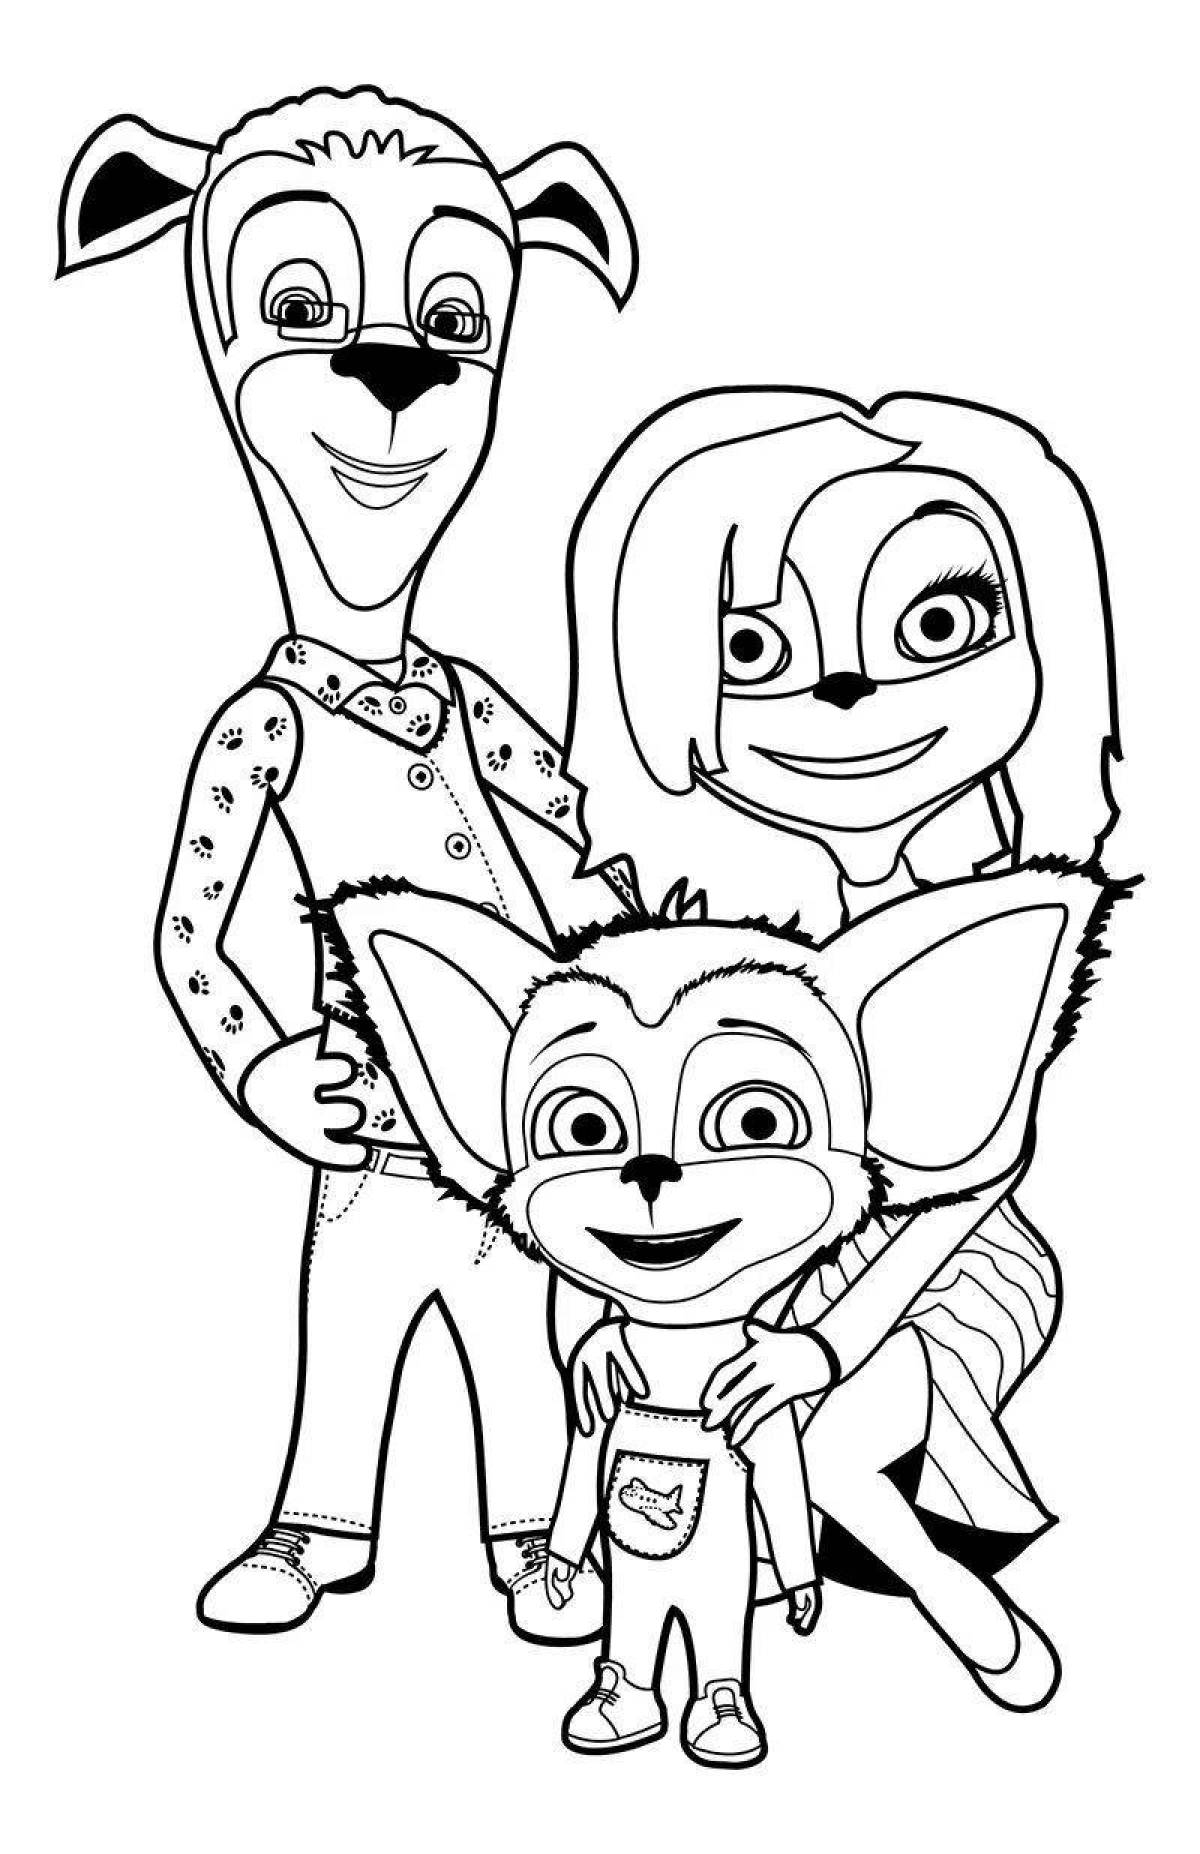 Glorious barboskins all coloring pages